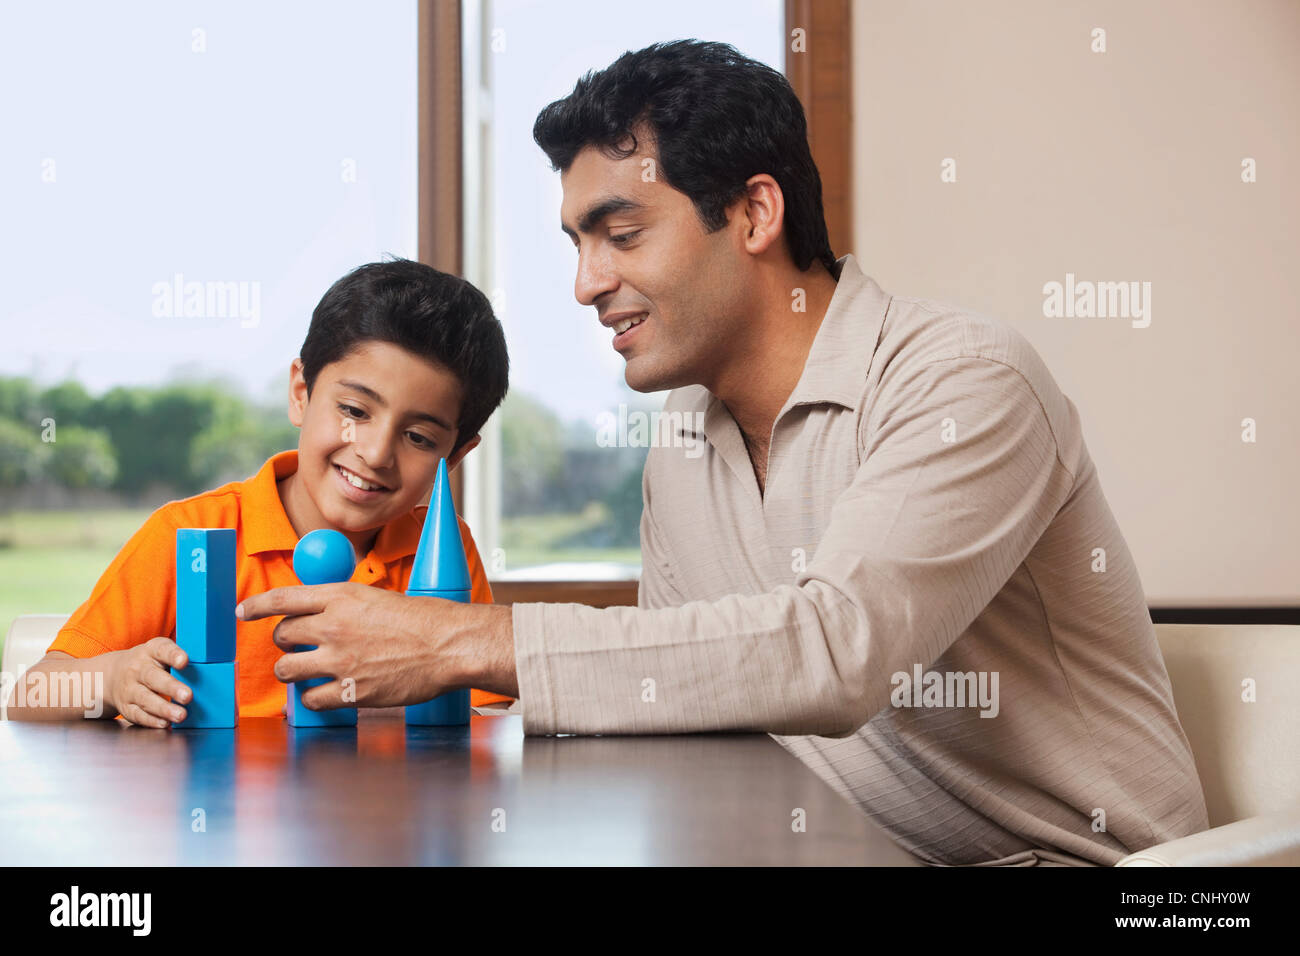 Father and son playing with building blocks Stock Photo